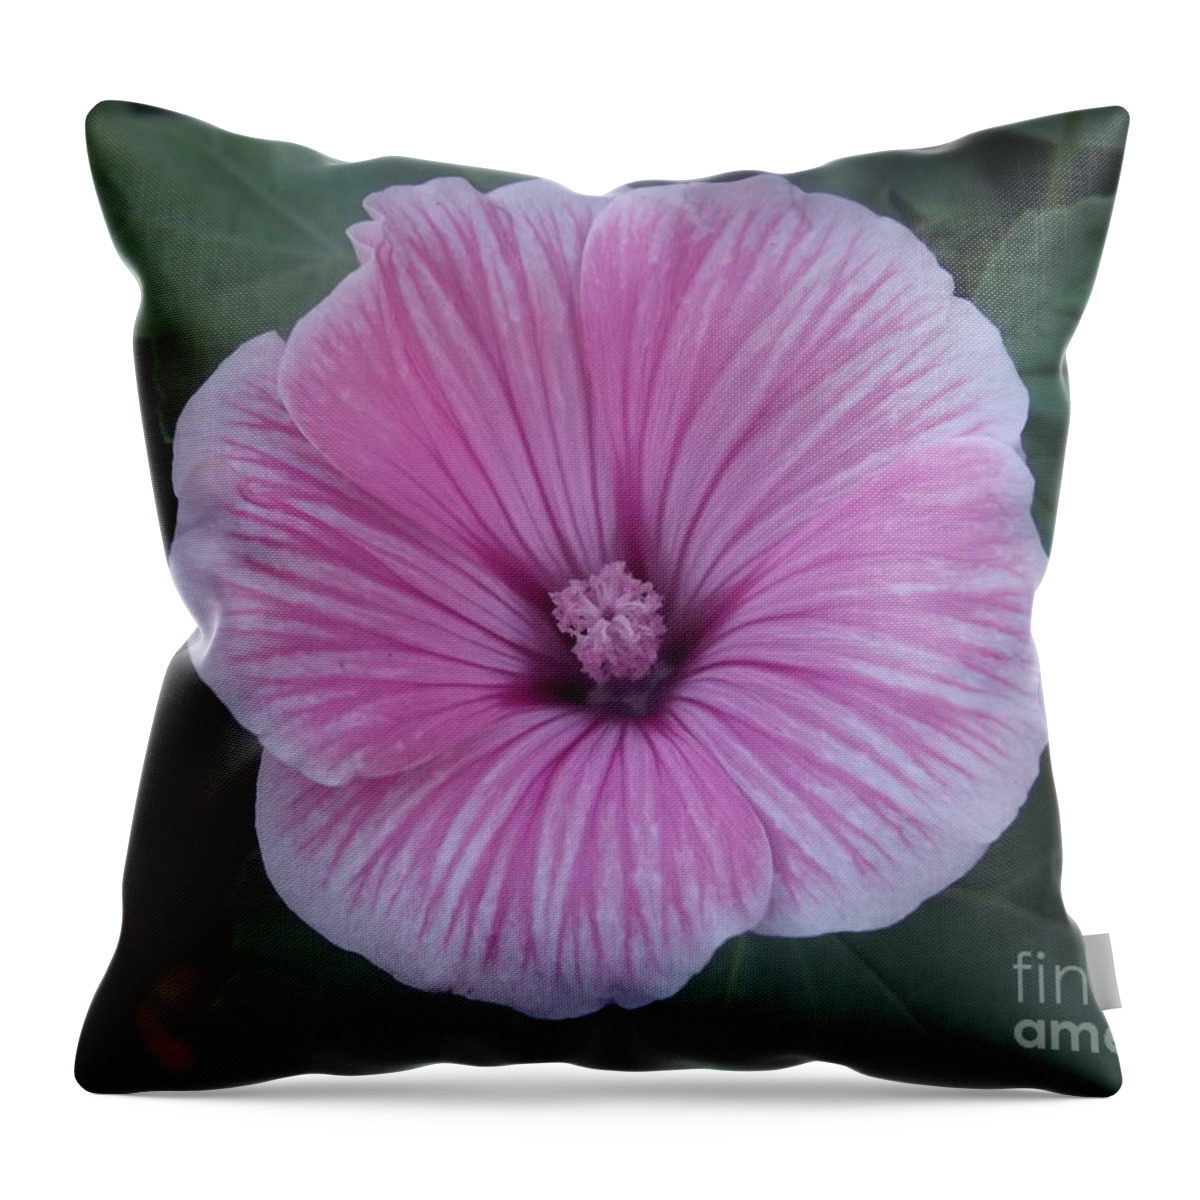 Mallow Throw Pillow featuring the photograph Soft Pink Lavatera by Lingfai Leung